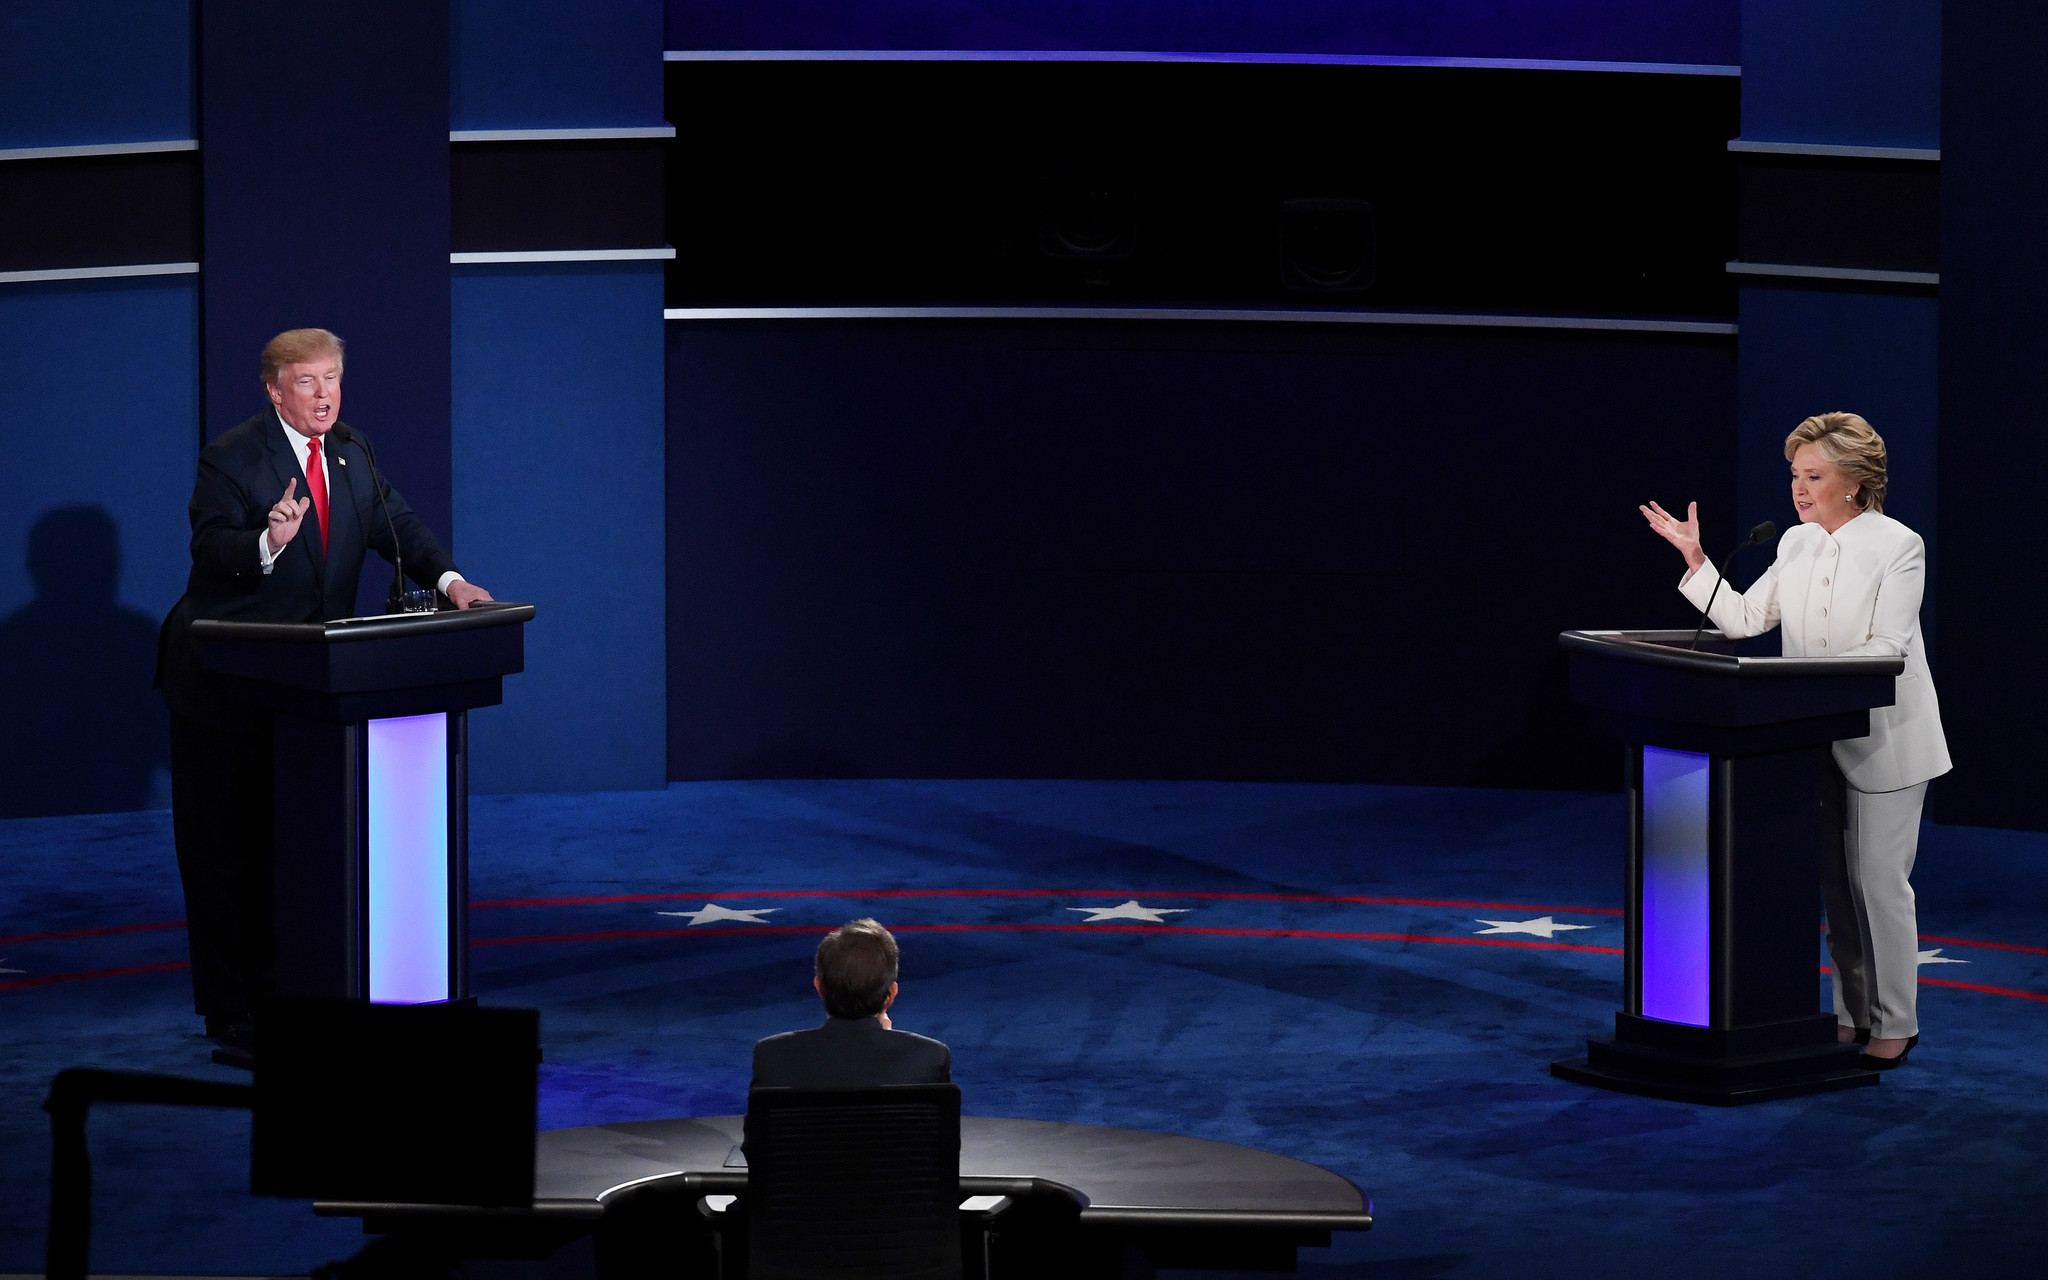 Goodnight, democracy: The best late-night jokes about the final presidential debate ...2048 x 1280